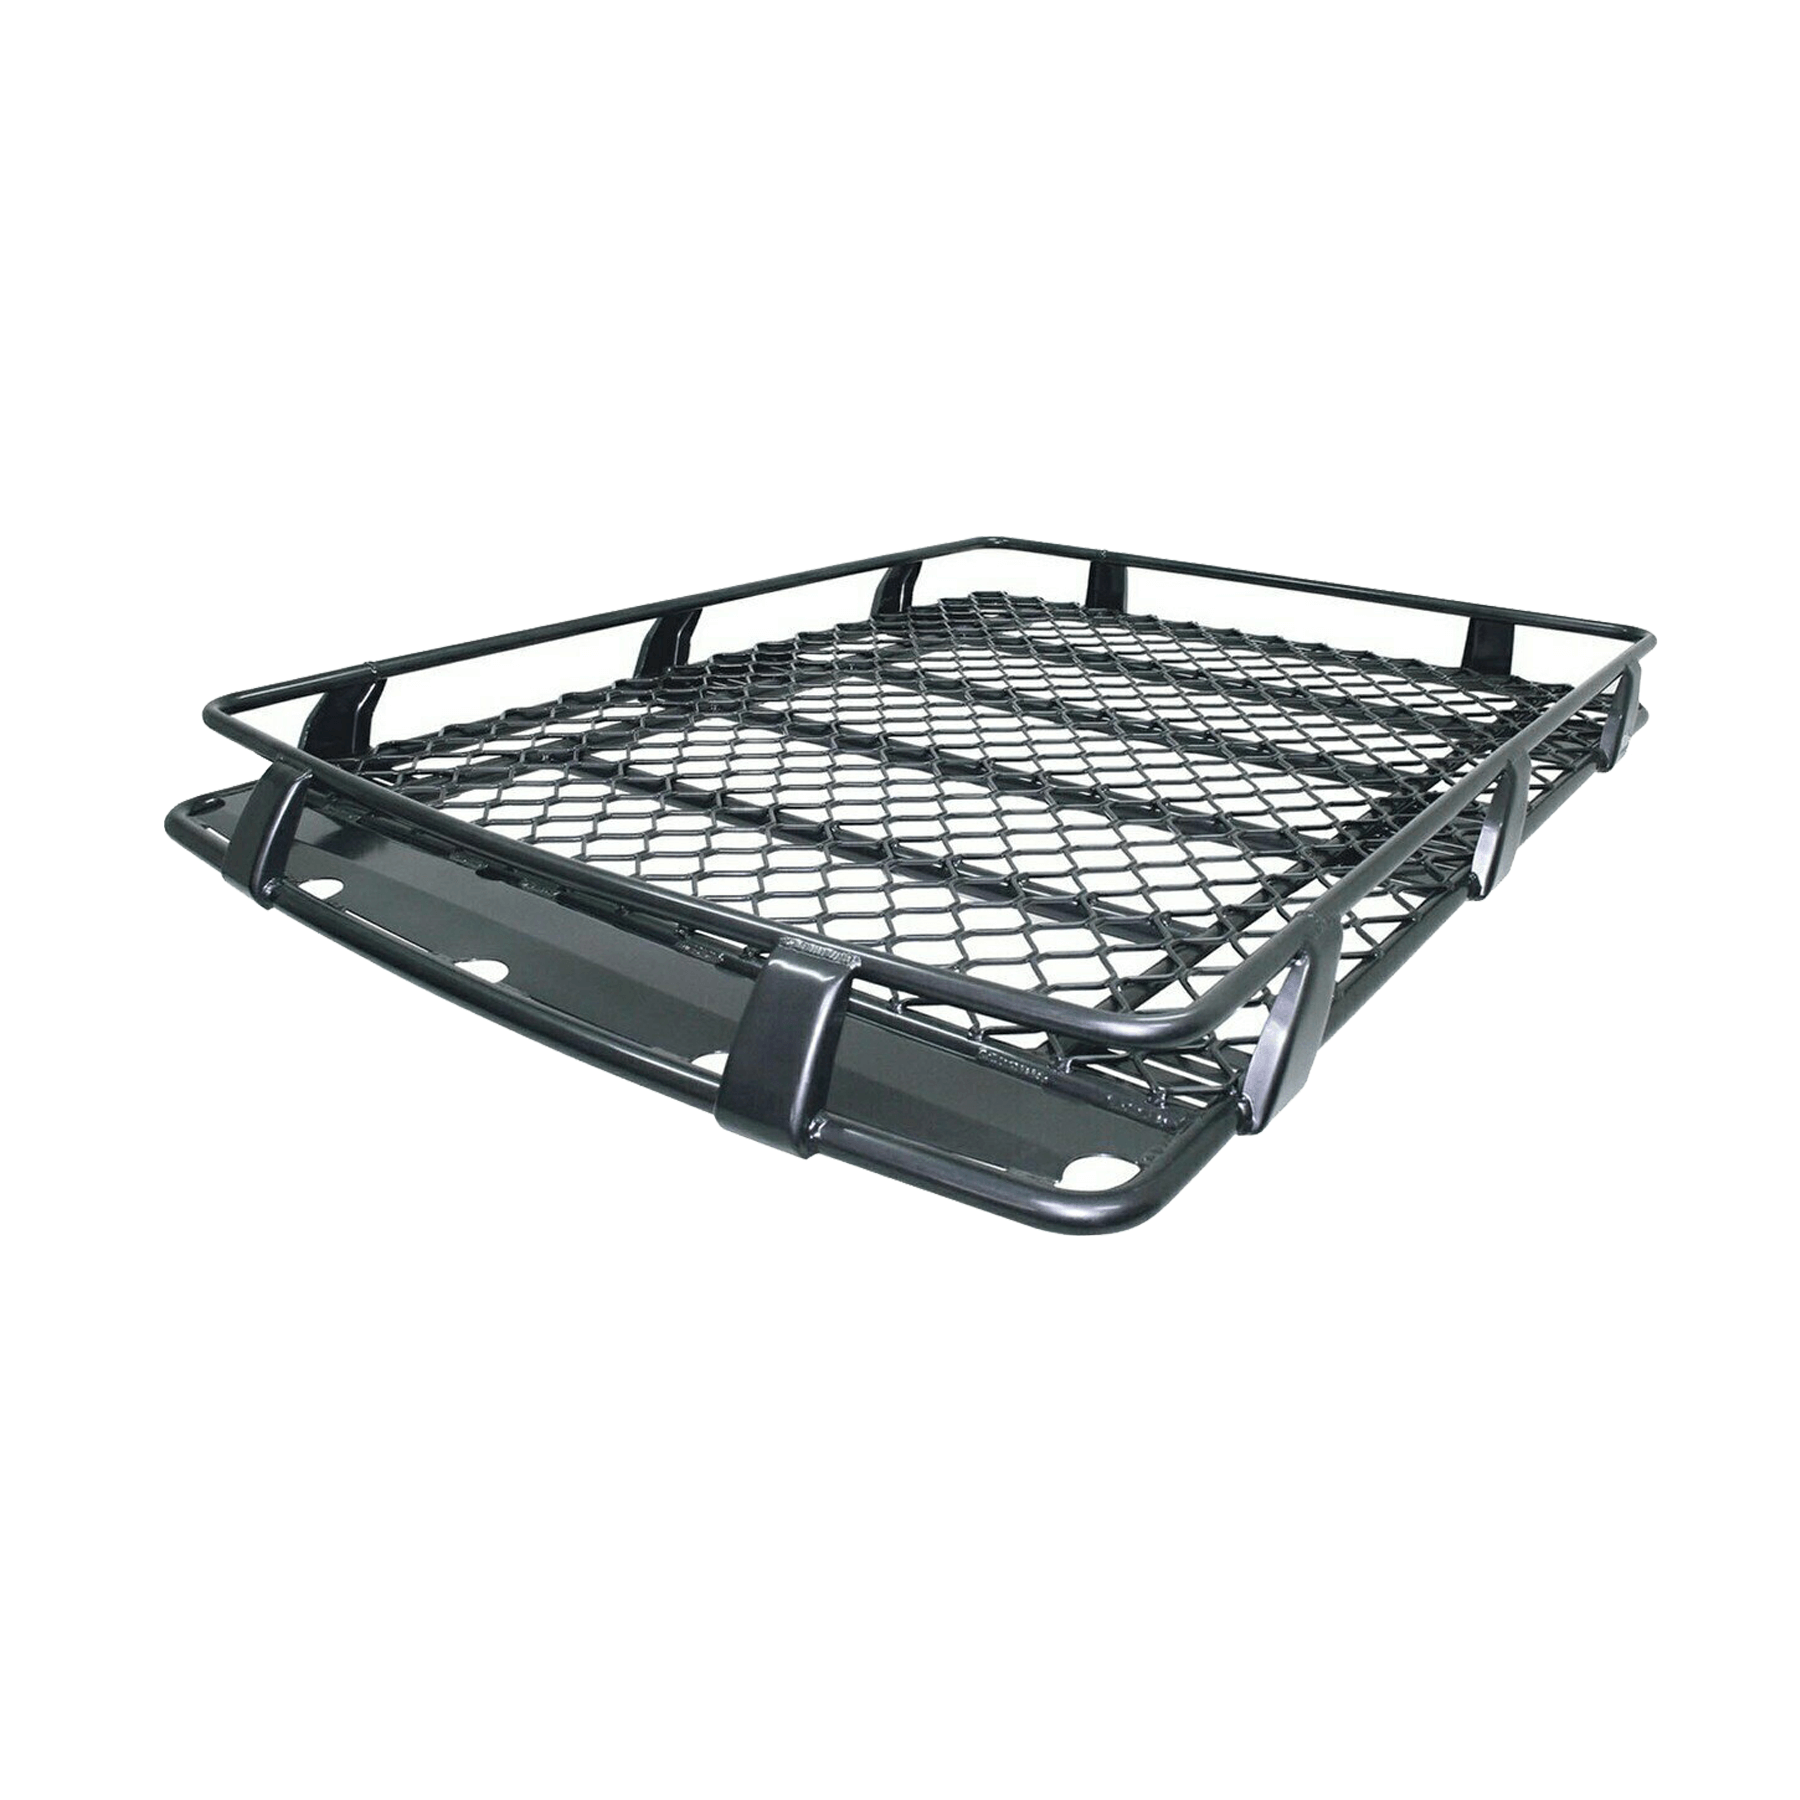 LANDCRUISER 80 SERIES 1990 to 1998 Basket Alloy Roof Rack - 2.2m x 1.25m (Open end)